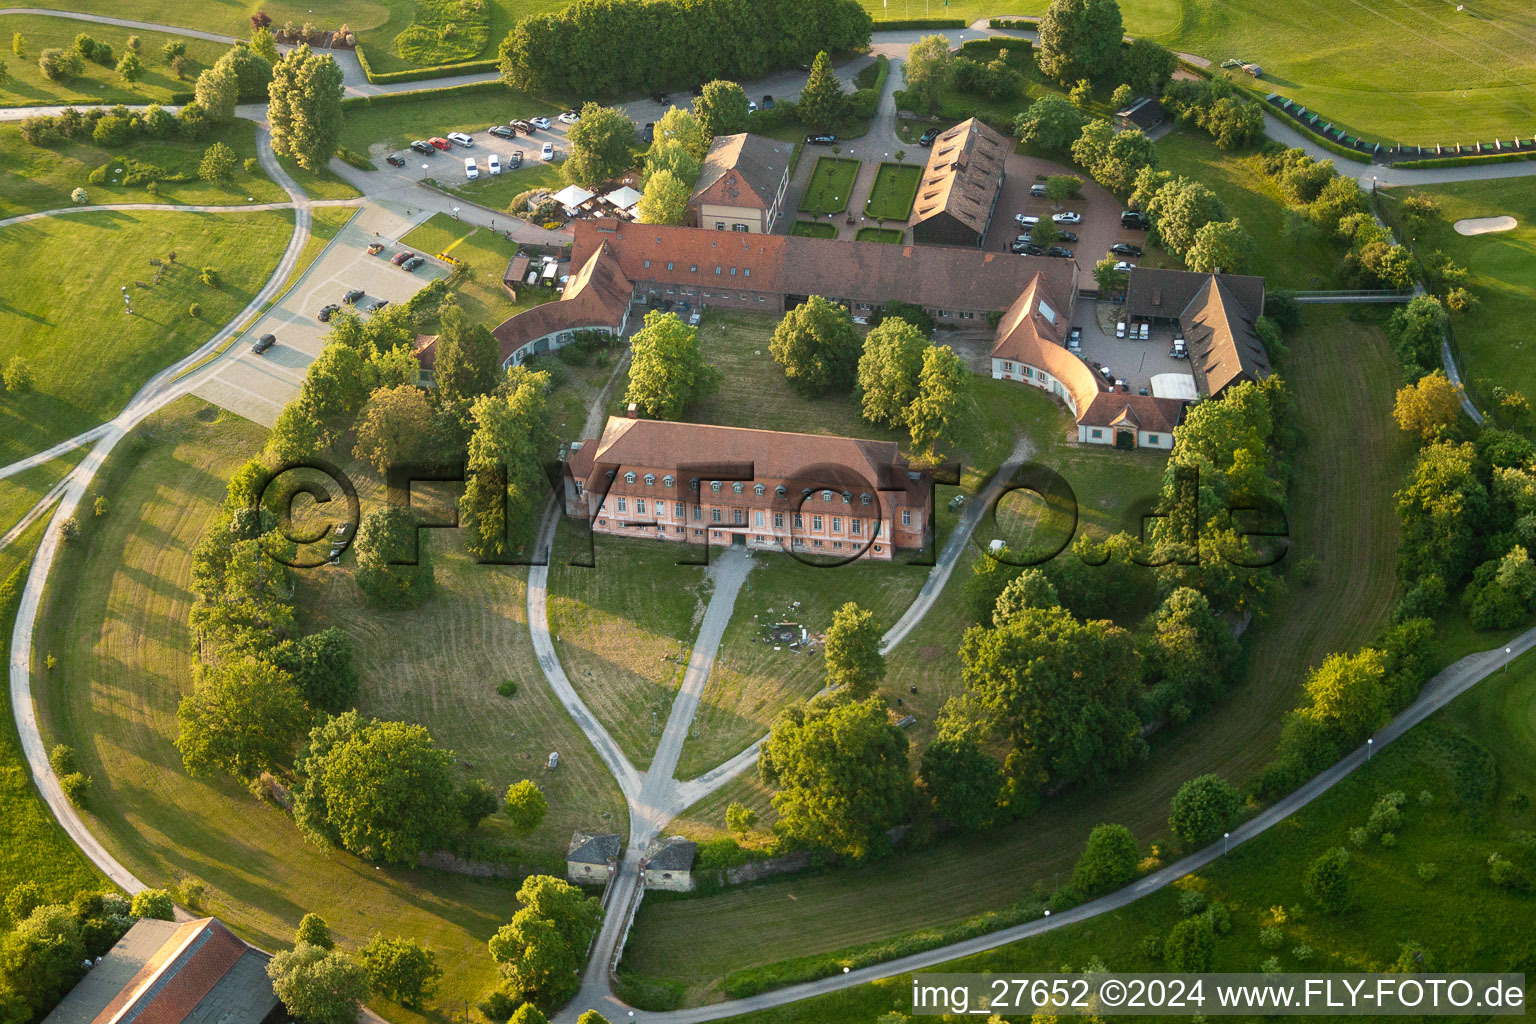 Aerial photograpy of Grounds of the Golf course at Golfclub Hofgut Scheibenhardt e.V in Karlsruhe in the state Baden-Wurttemberg